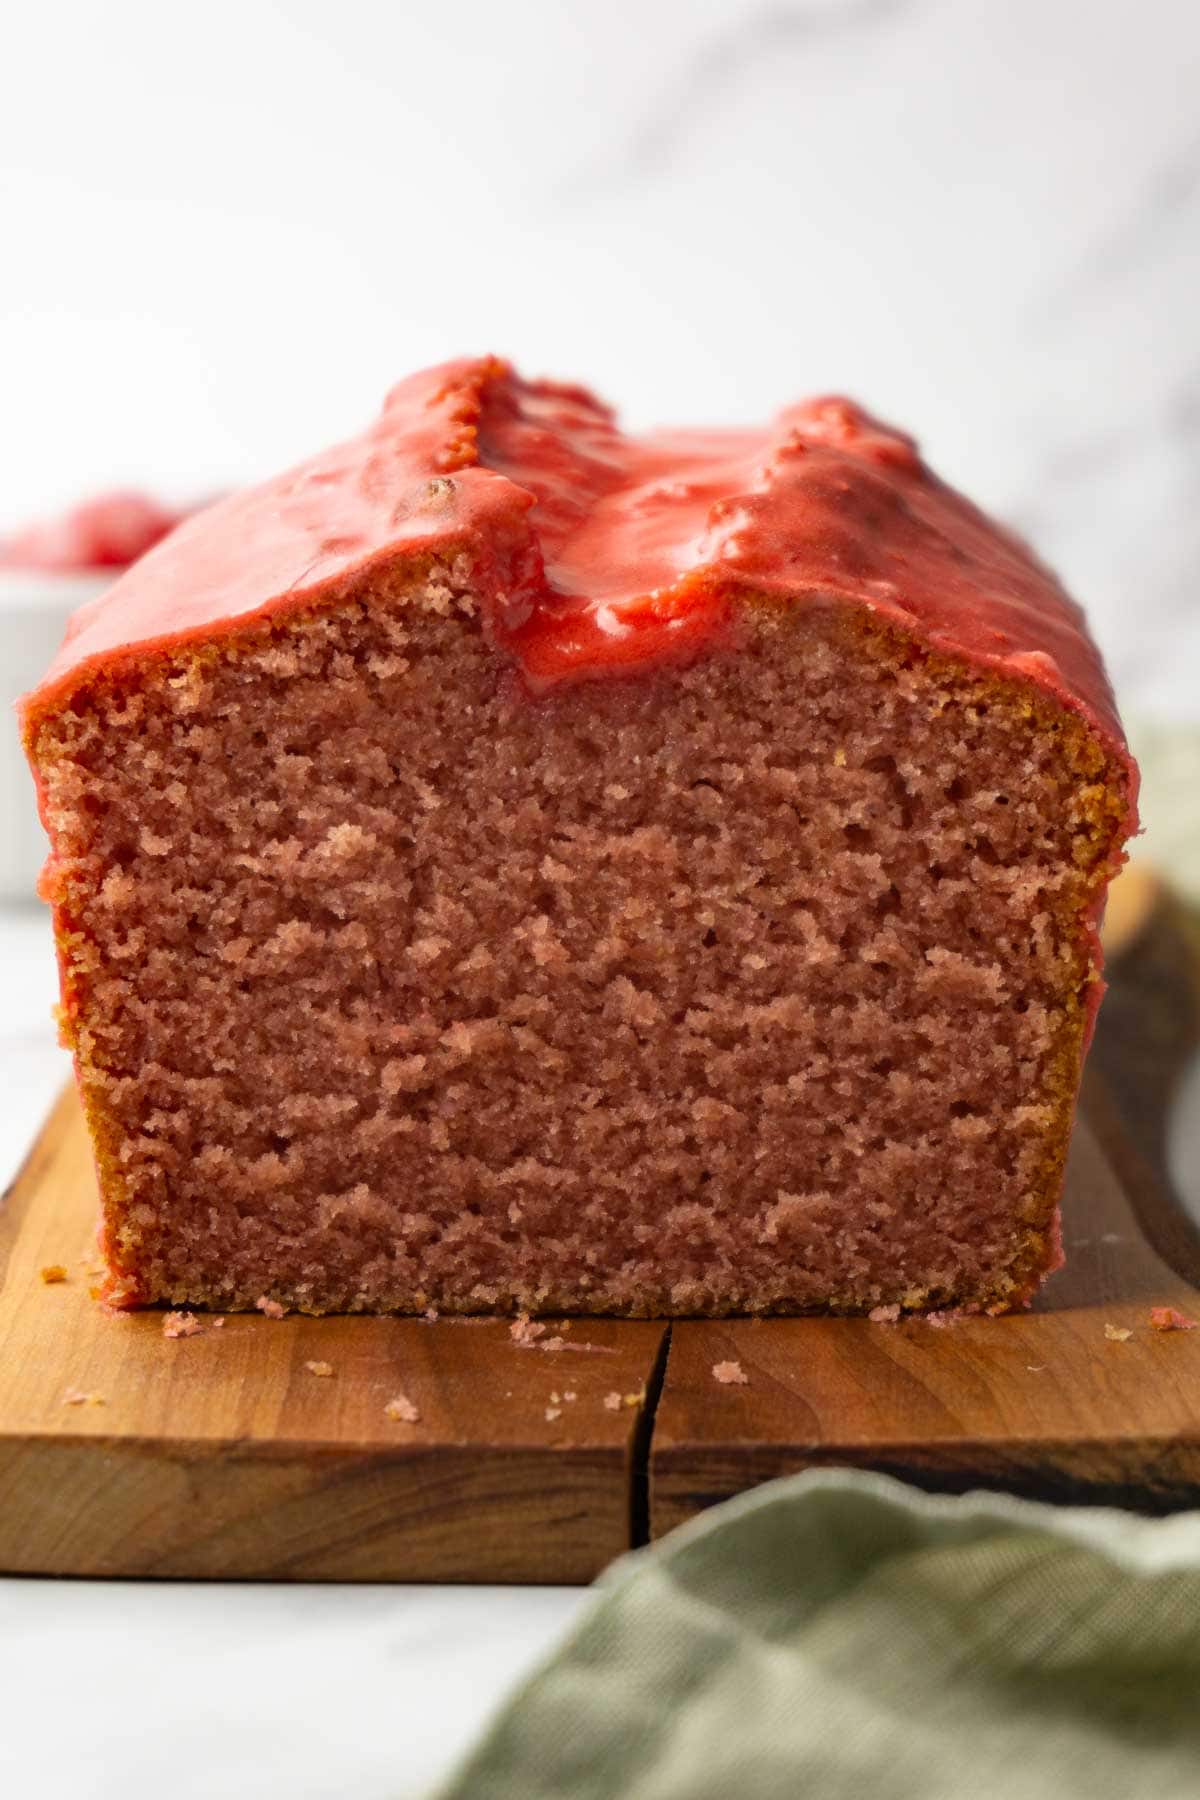 Strawberry pound cake with a strawberry sugar glaze on a wooden serving board, few slices are taken.